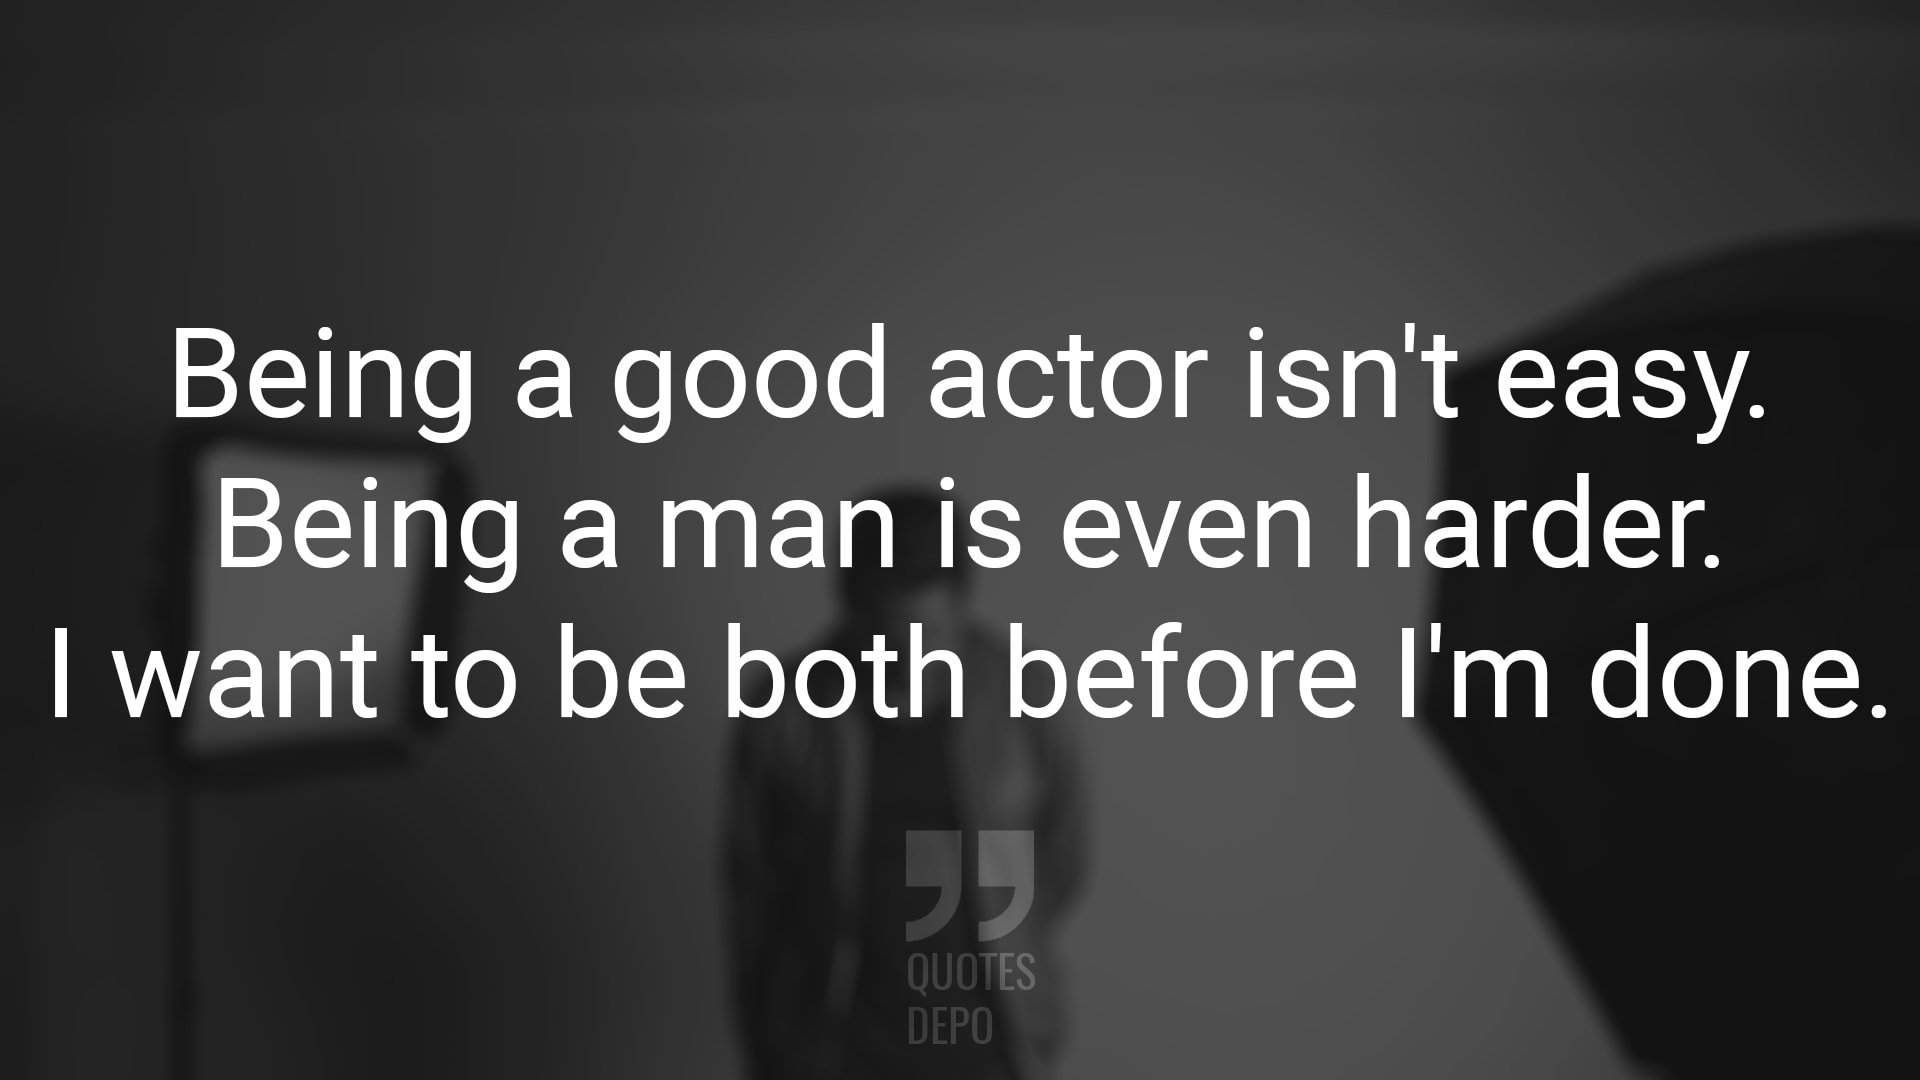 Being a Good Actor isn't Easy